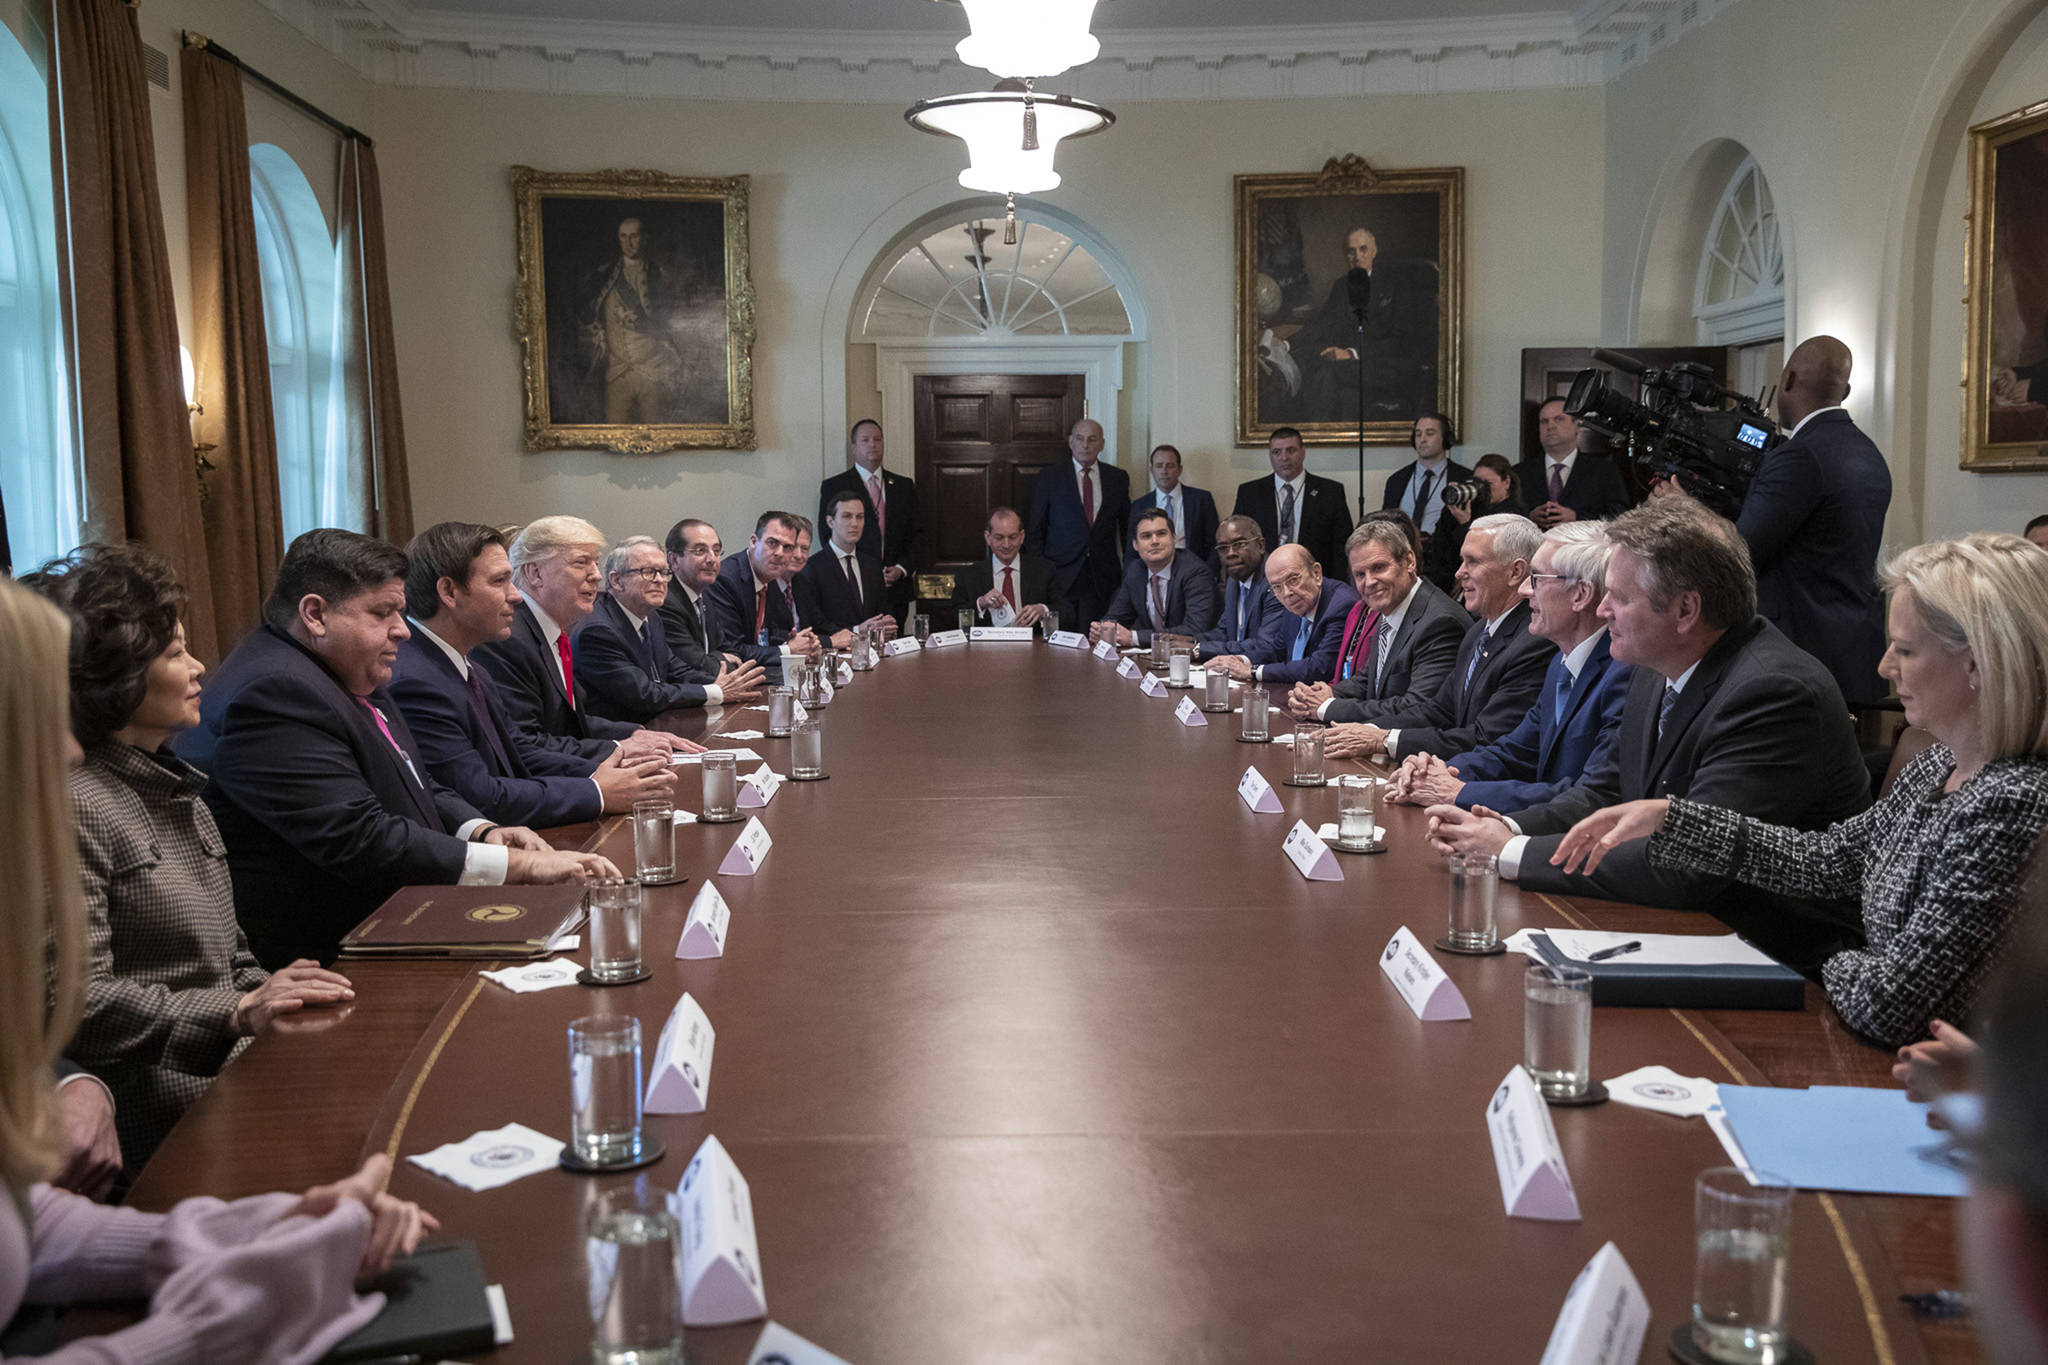 President Donald J. Trump, joined by Vice President Mike Pence, participates in a discussion with Governors-Elect Thursday, Dec. 13, 2018, in the Cabinet Room of the White House. (Official White House Photo | Joyce N. Boghosian)